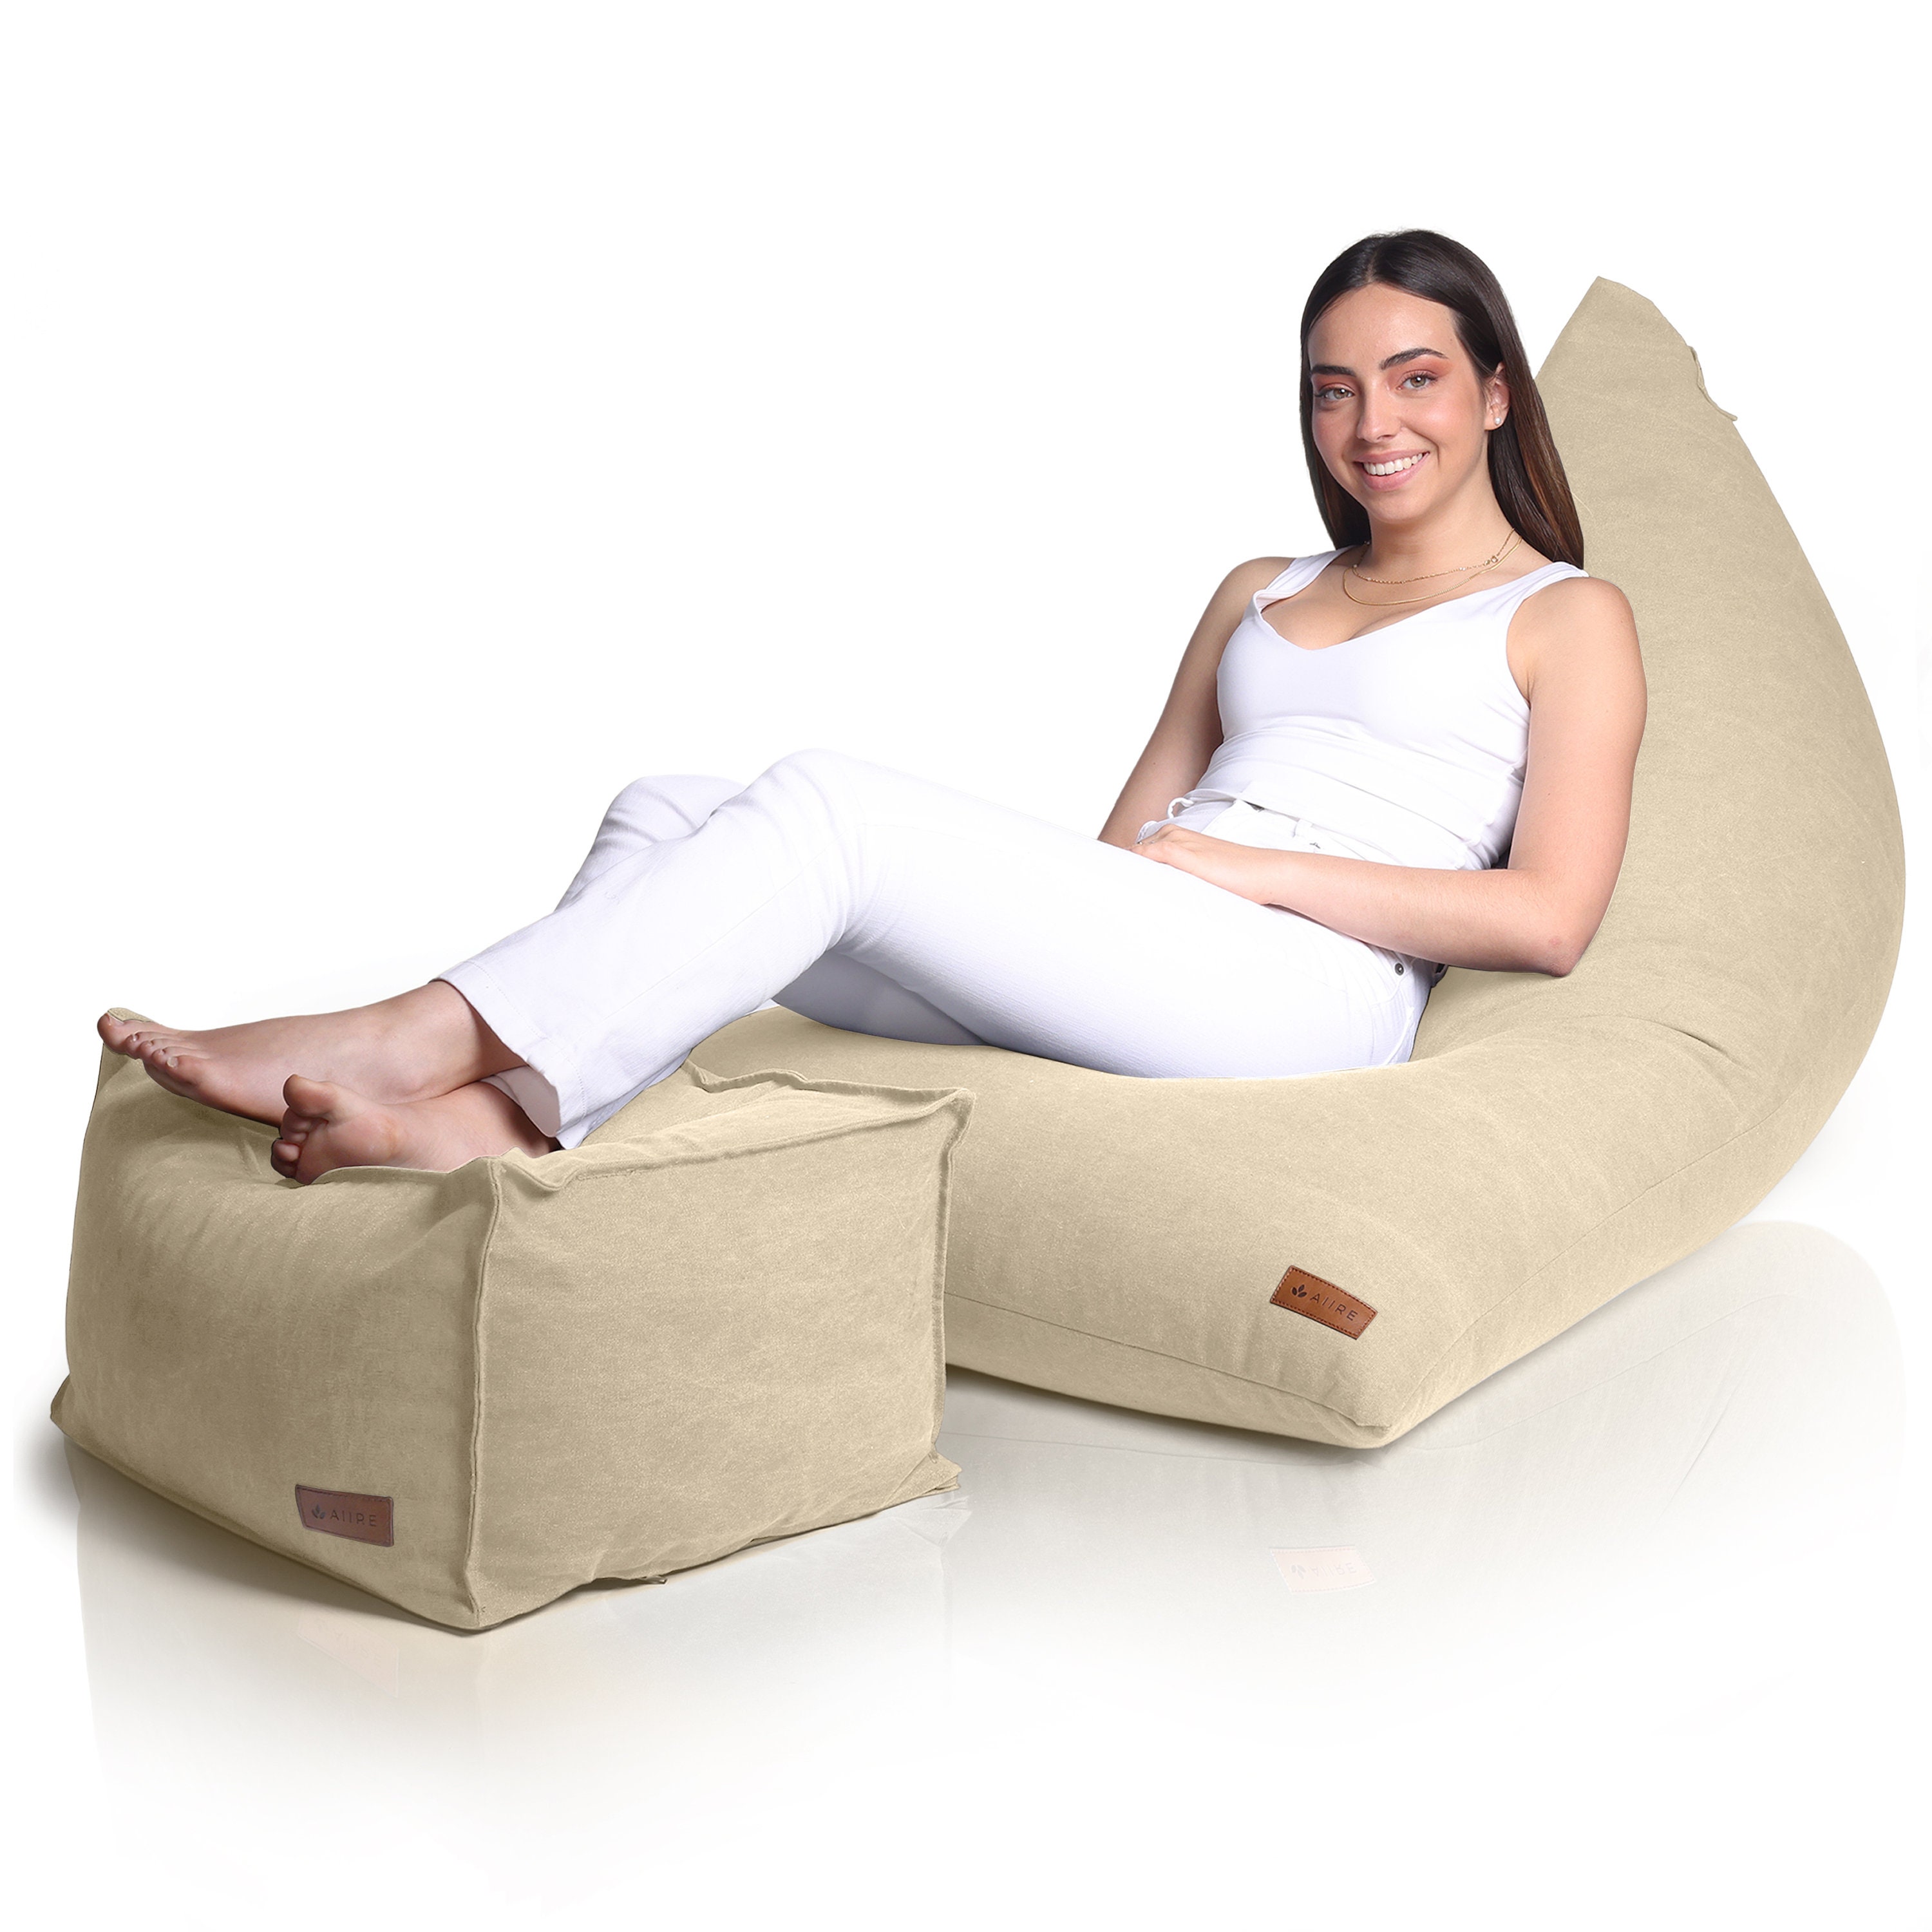 Modern Pouf With Padding Included for Young People Bean Bag Chair Giant  Design Exclusive for Salon Puff XXL Beige 